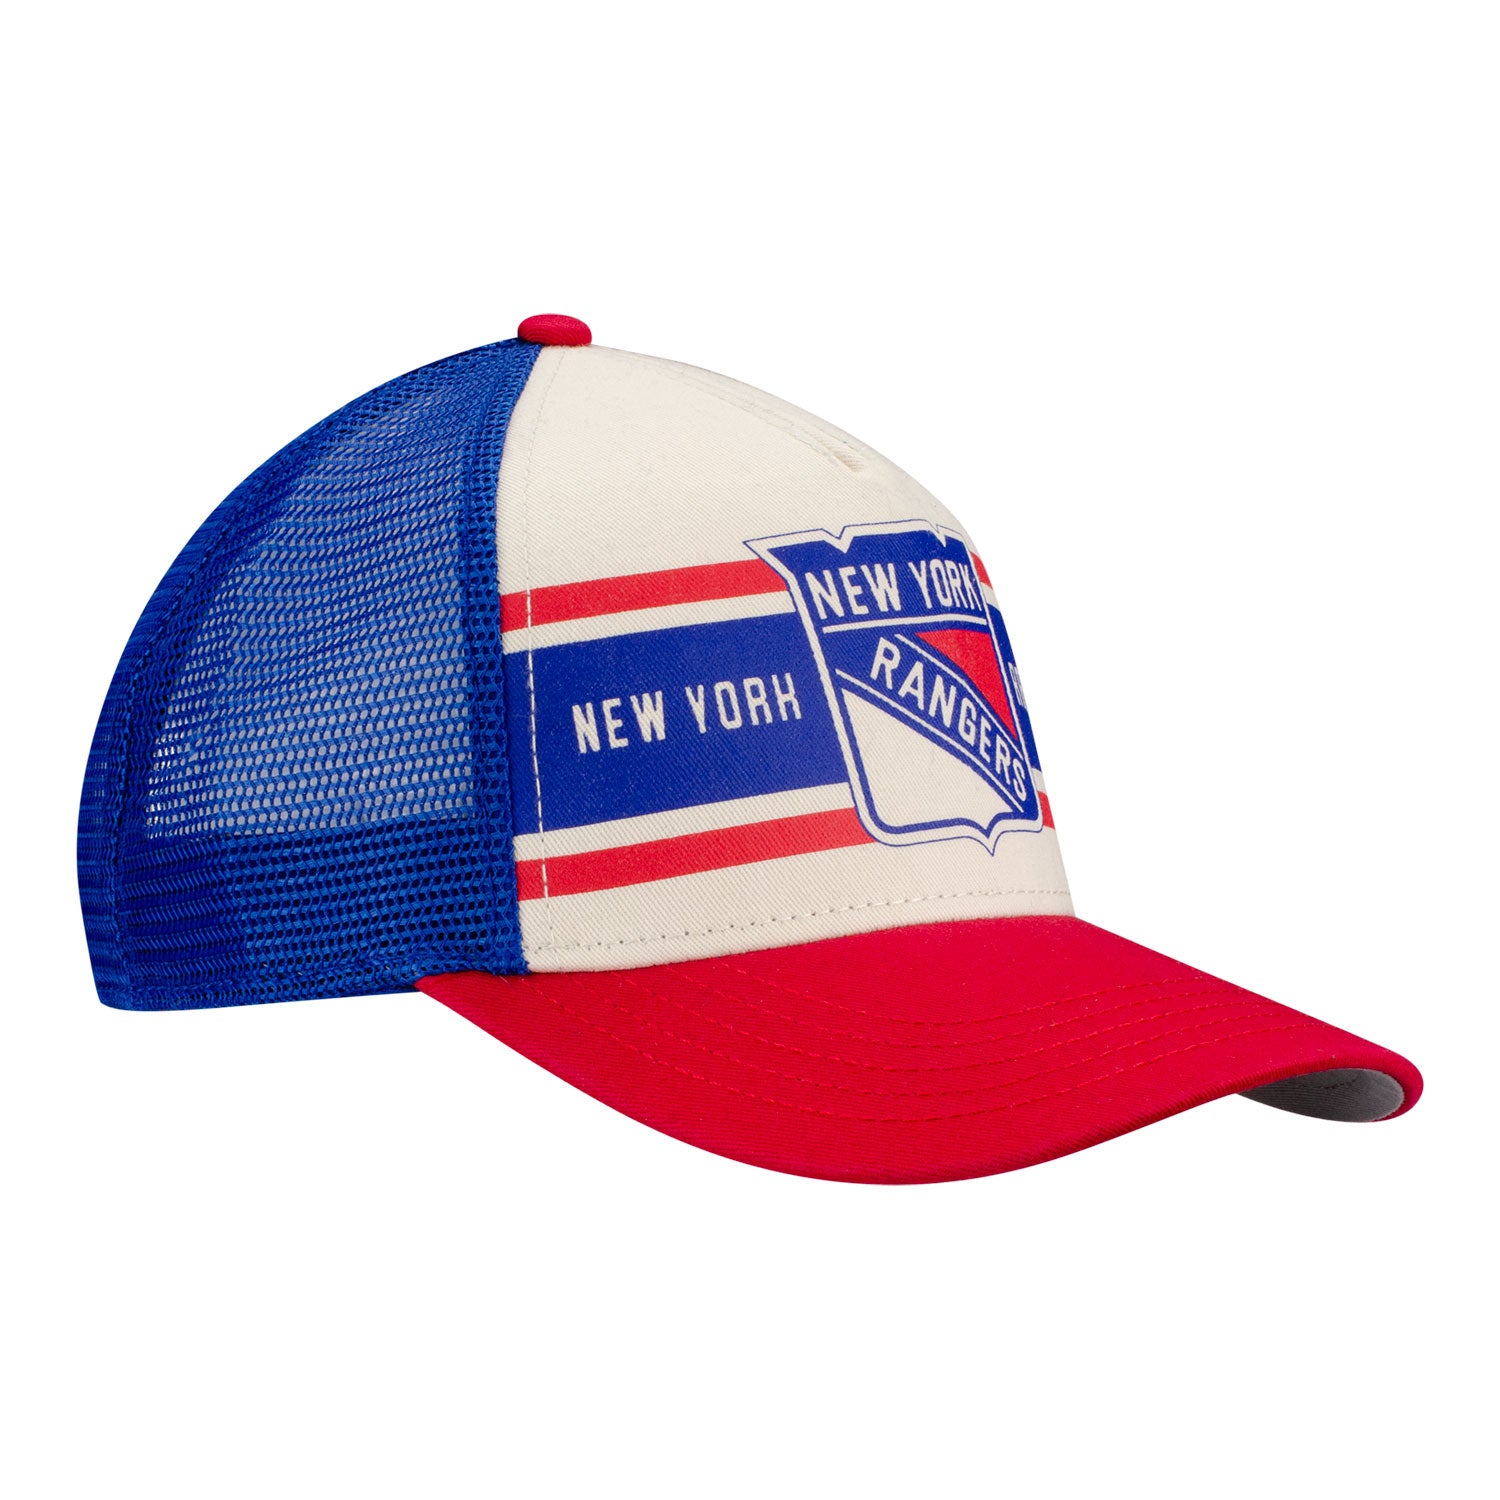 American Needle Rangers Sinclair Hat In Blue, Red & White - Angled Right Side View